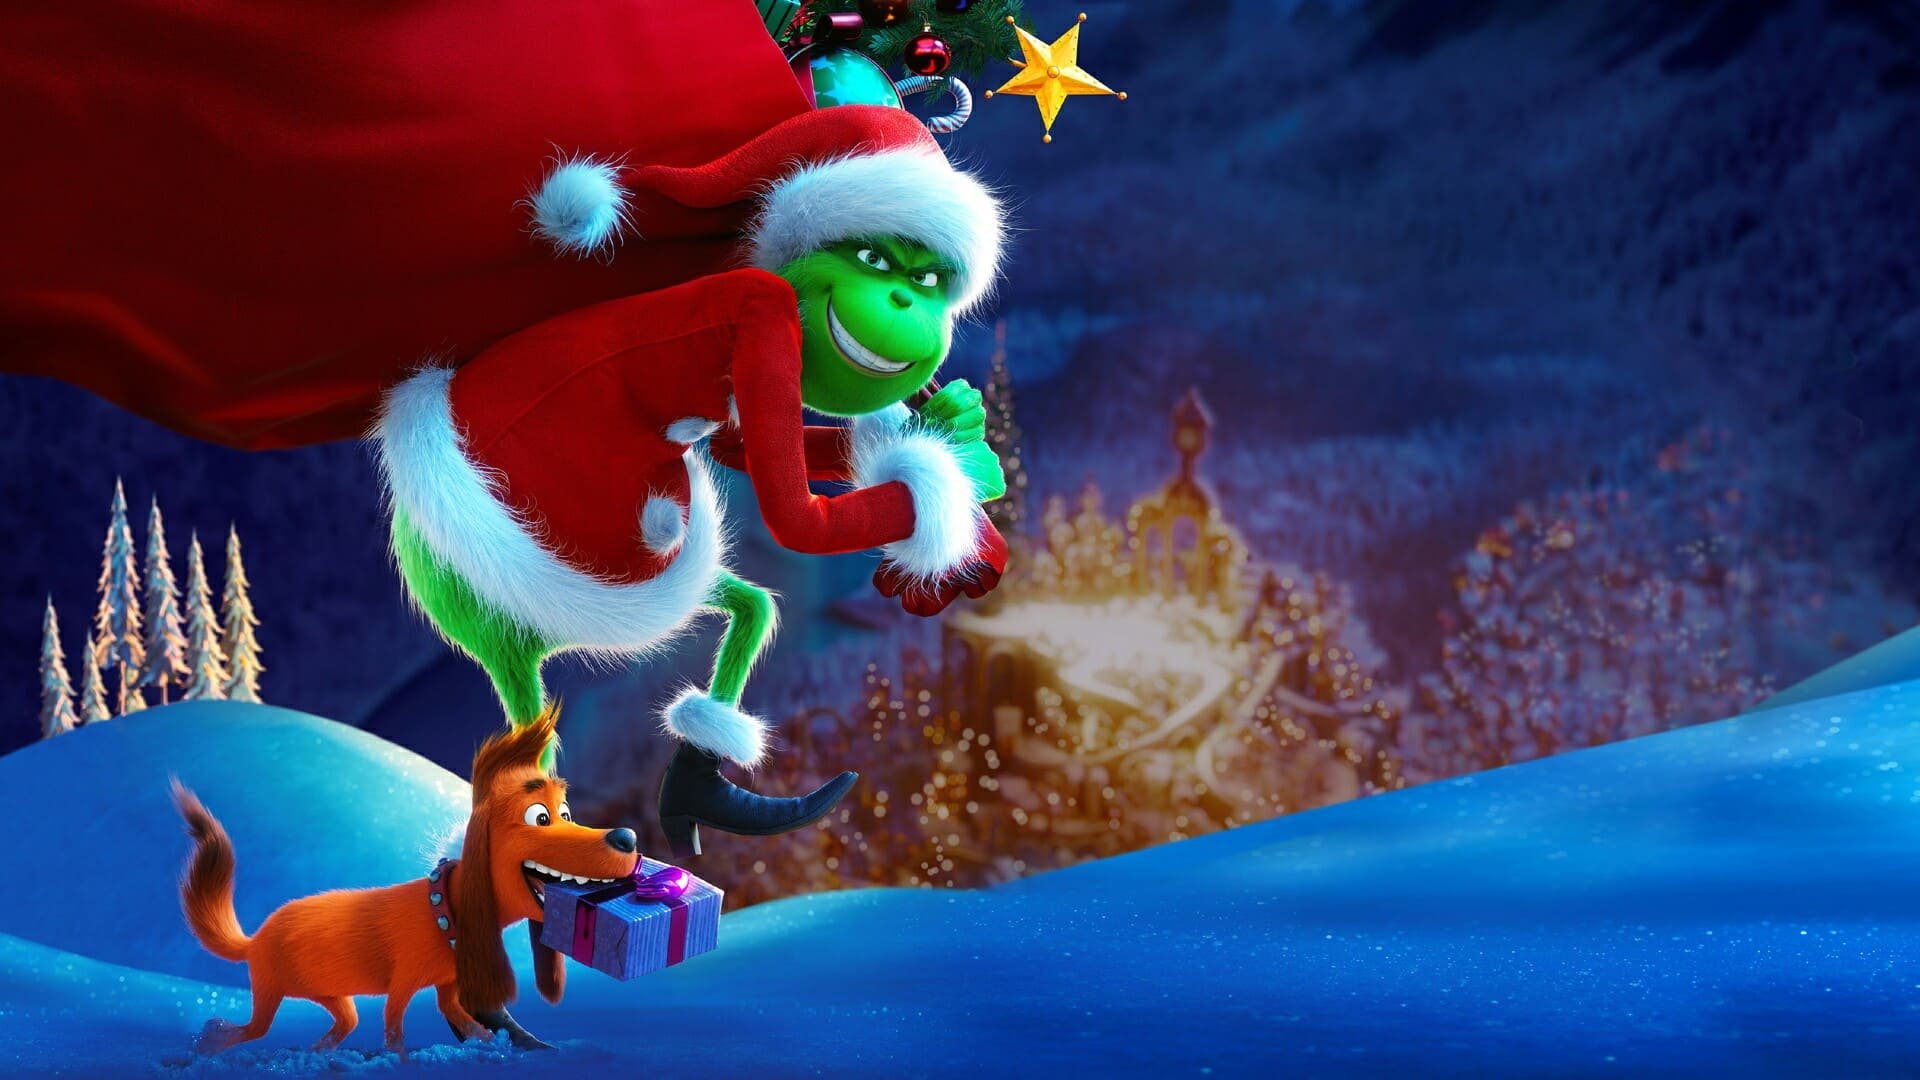 The Grinch 4K 2018 big poster